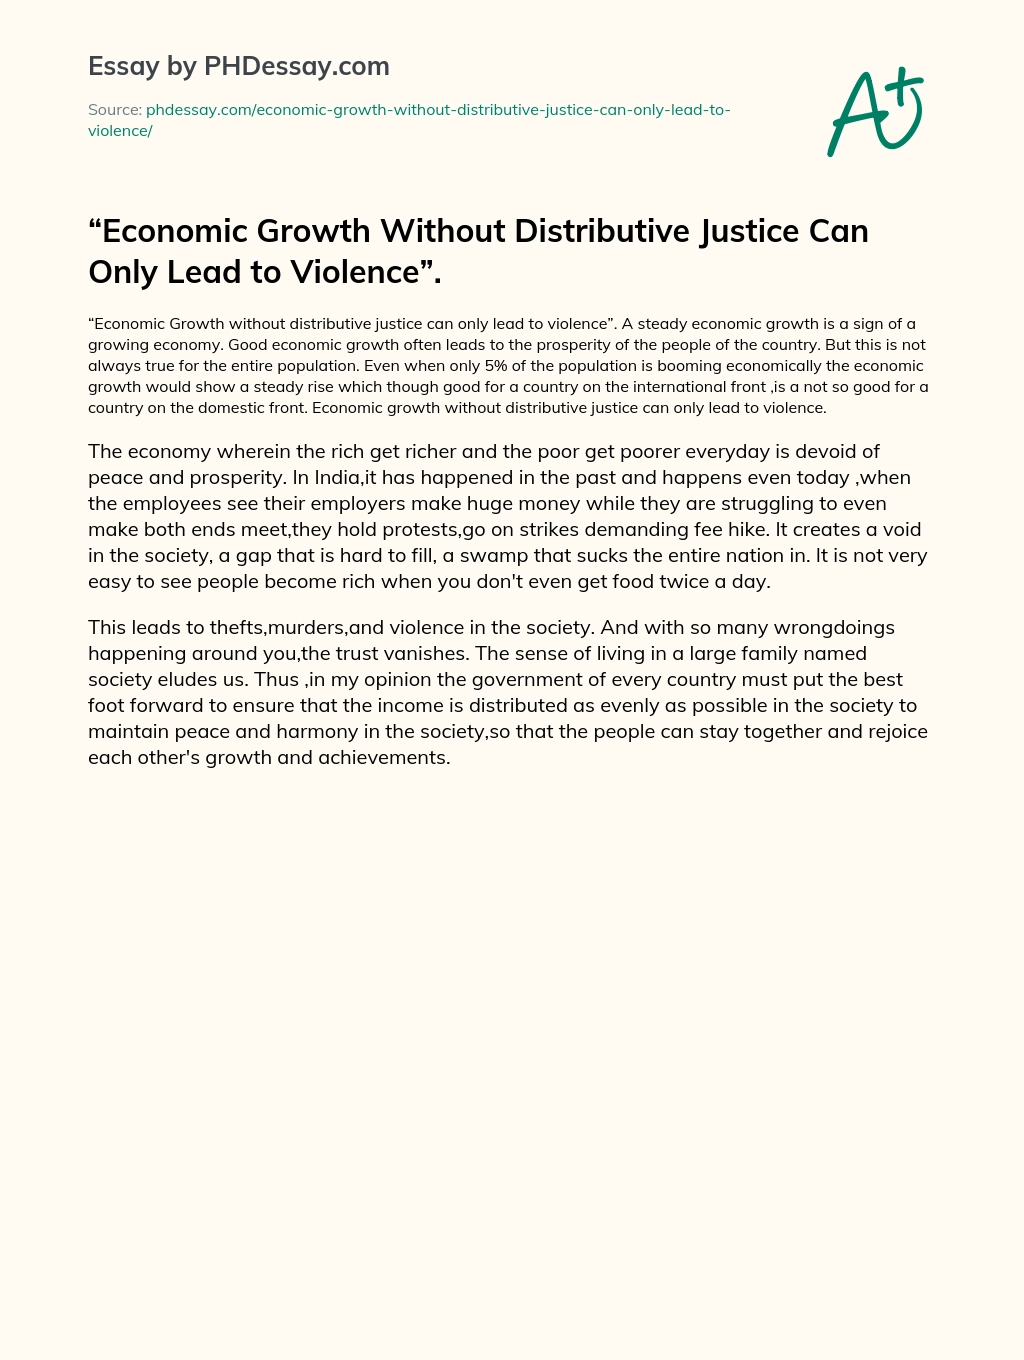 Economic Growth Without Distributive Justice Can Only Lead to Violence. essay